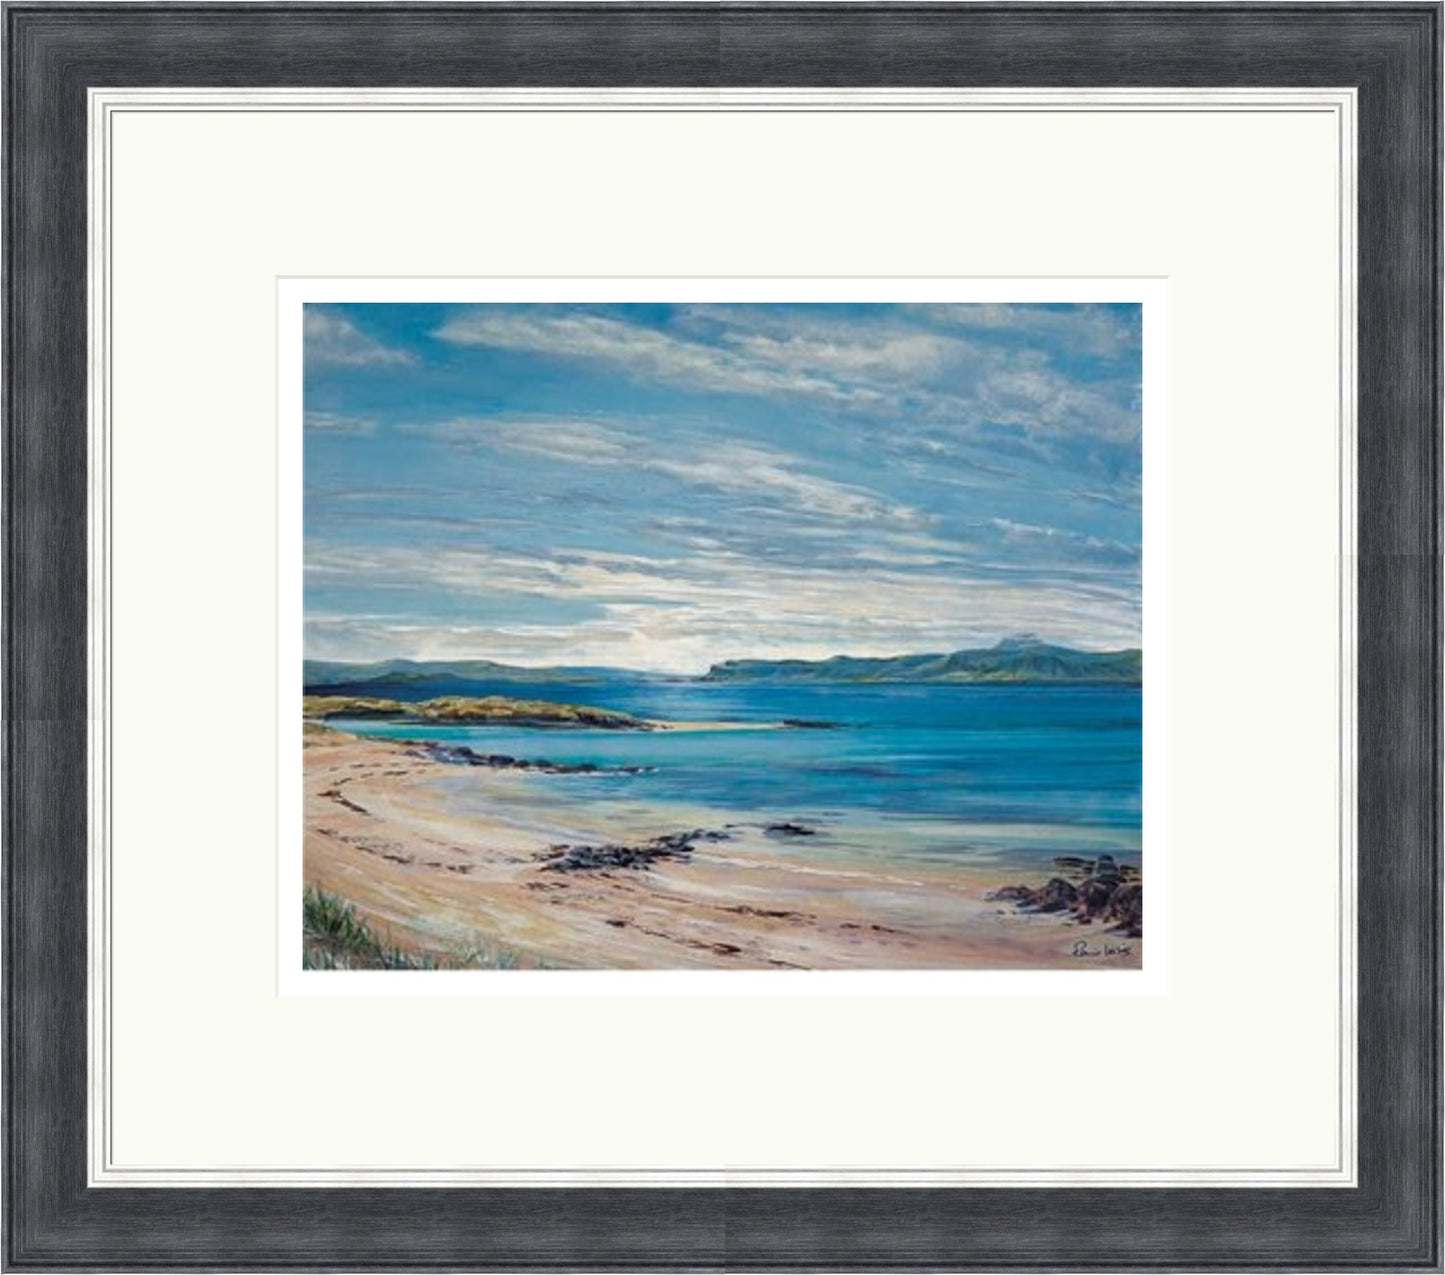 North Sands, Iona by Ronnie Leckie